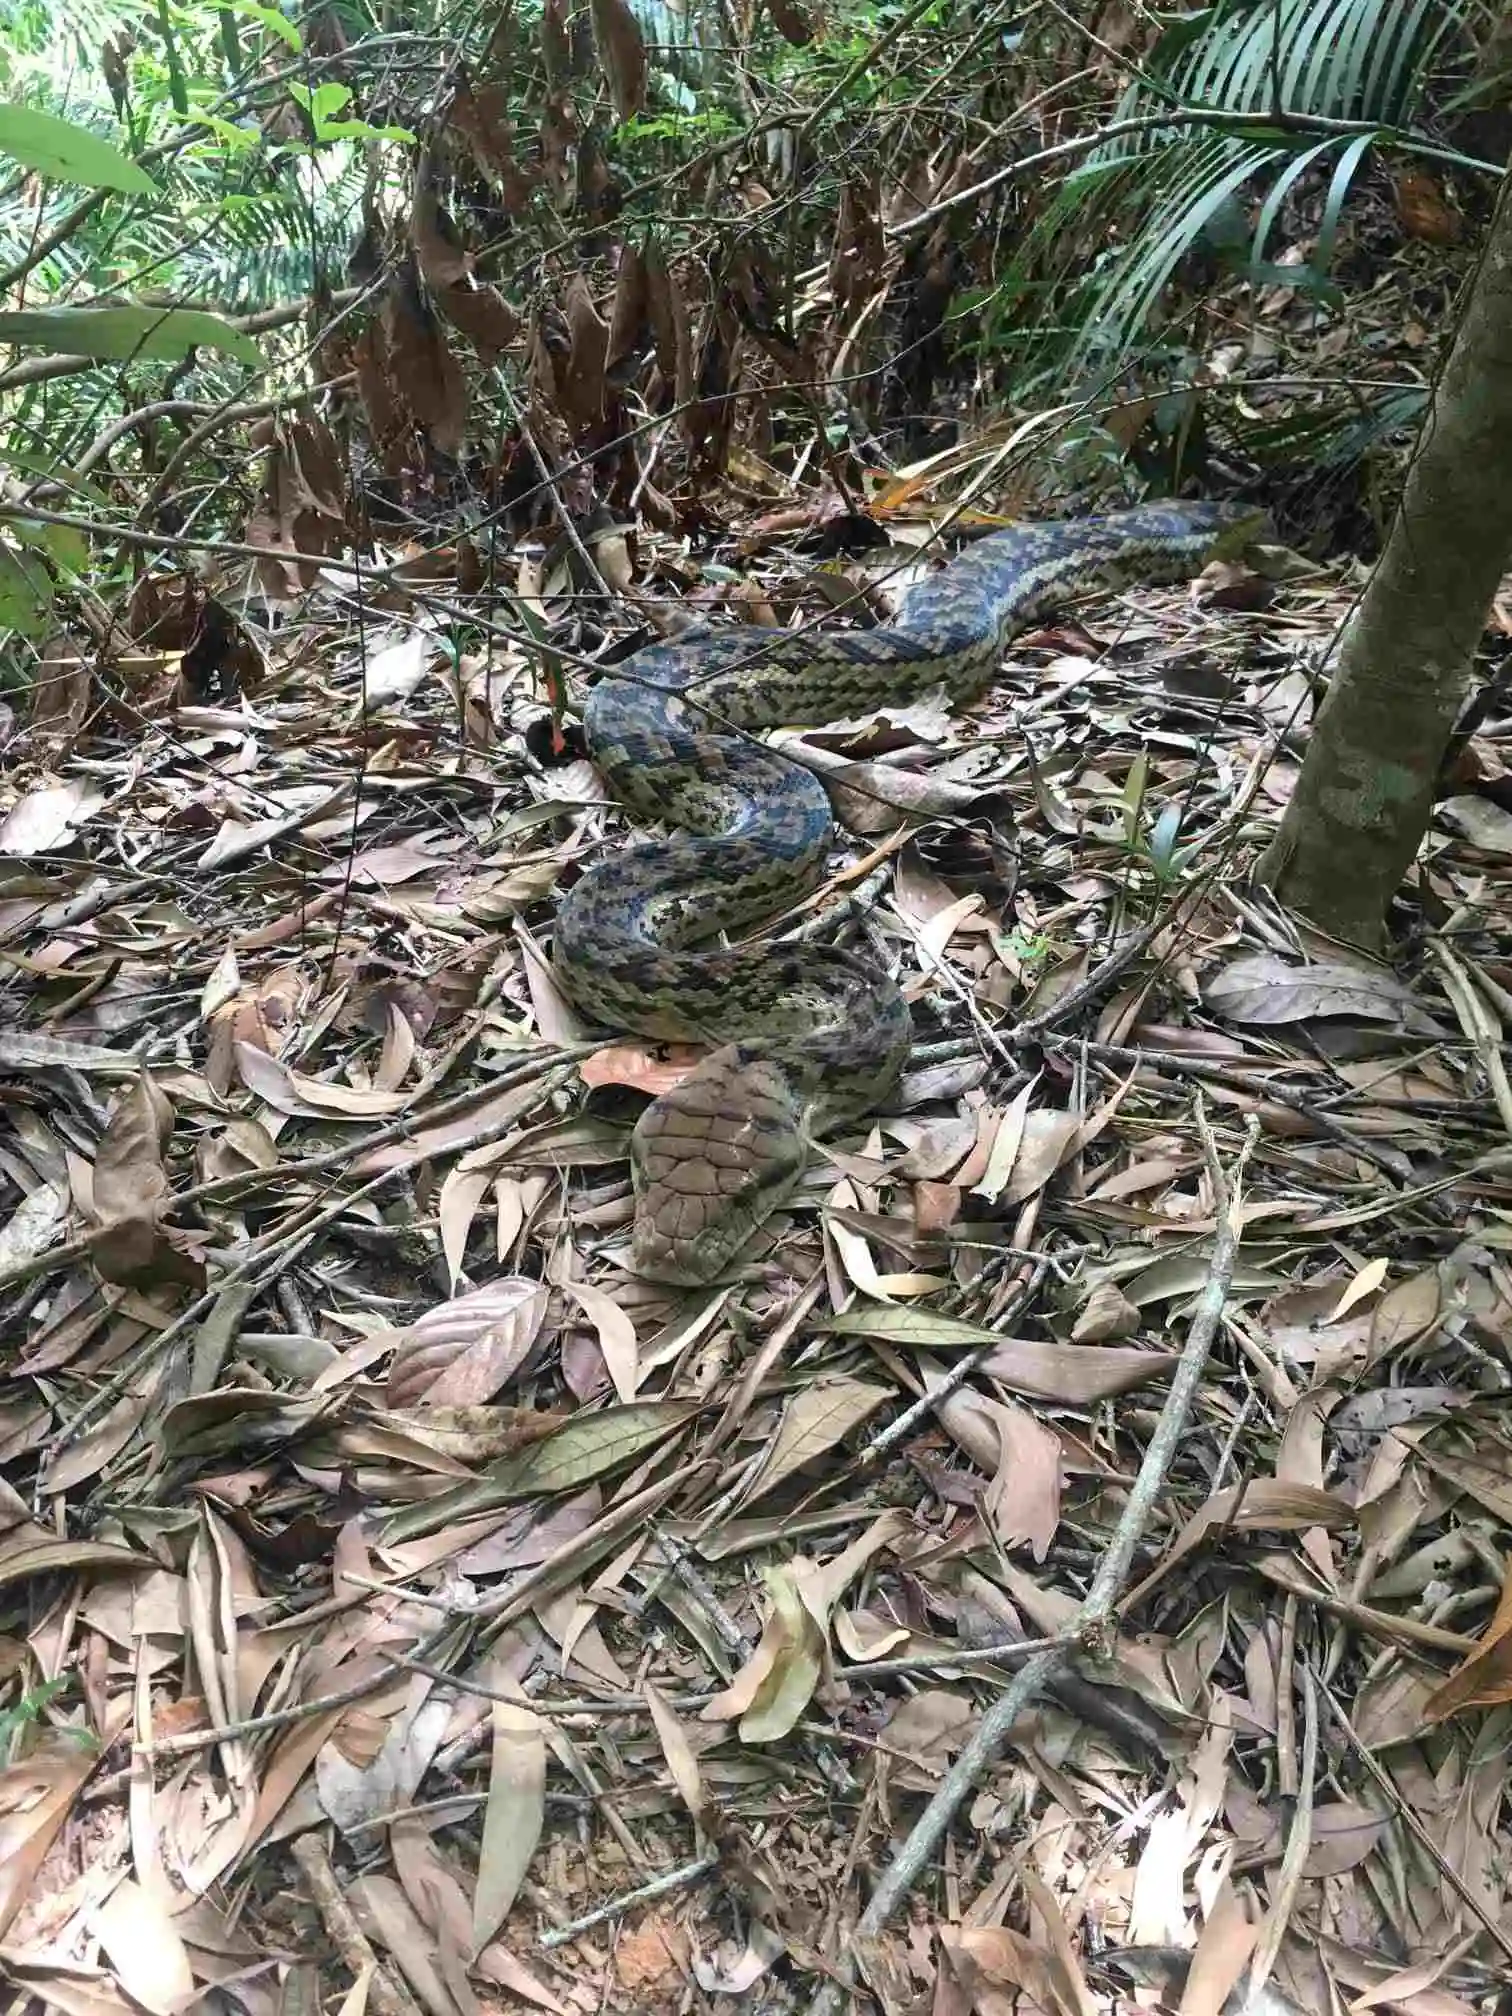 A brown and grey diamond patterned snake can be seen in the scrub